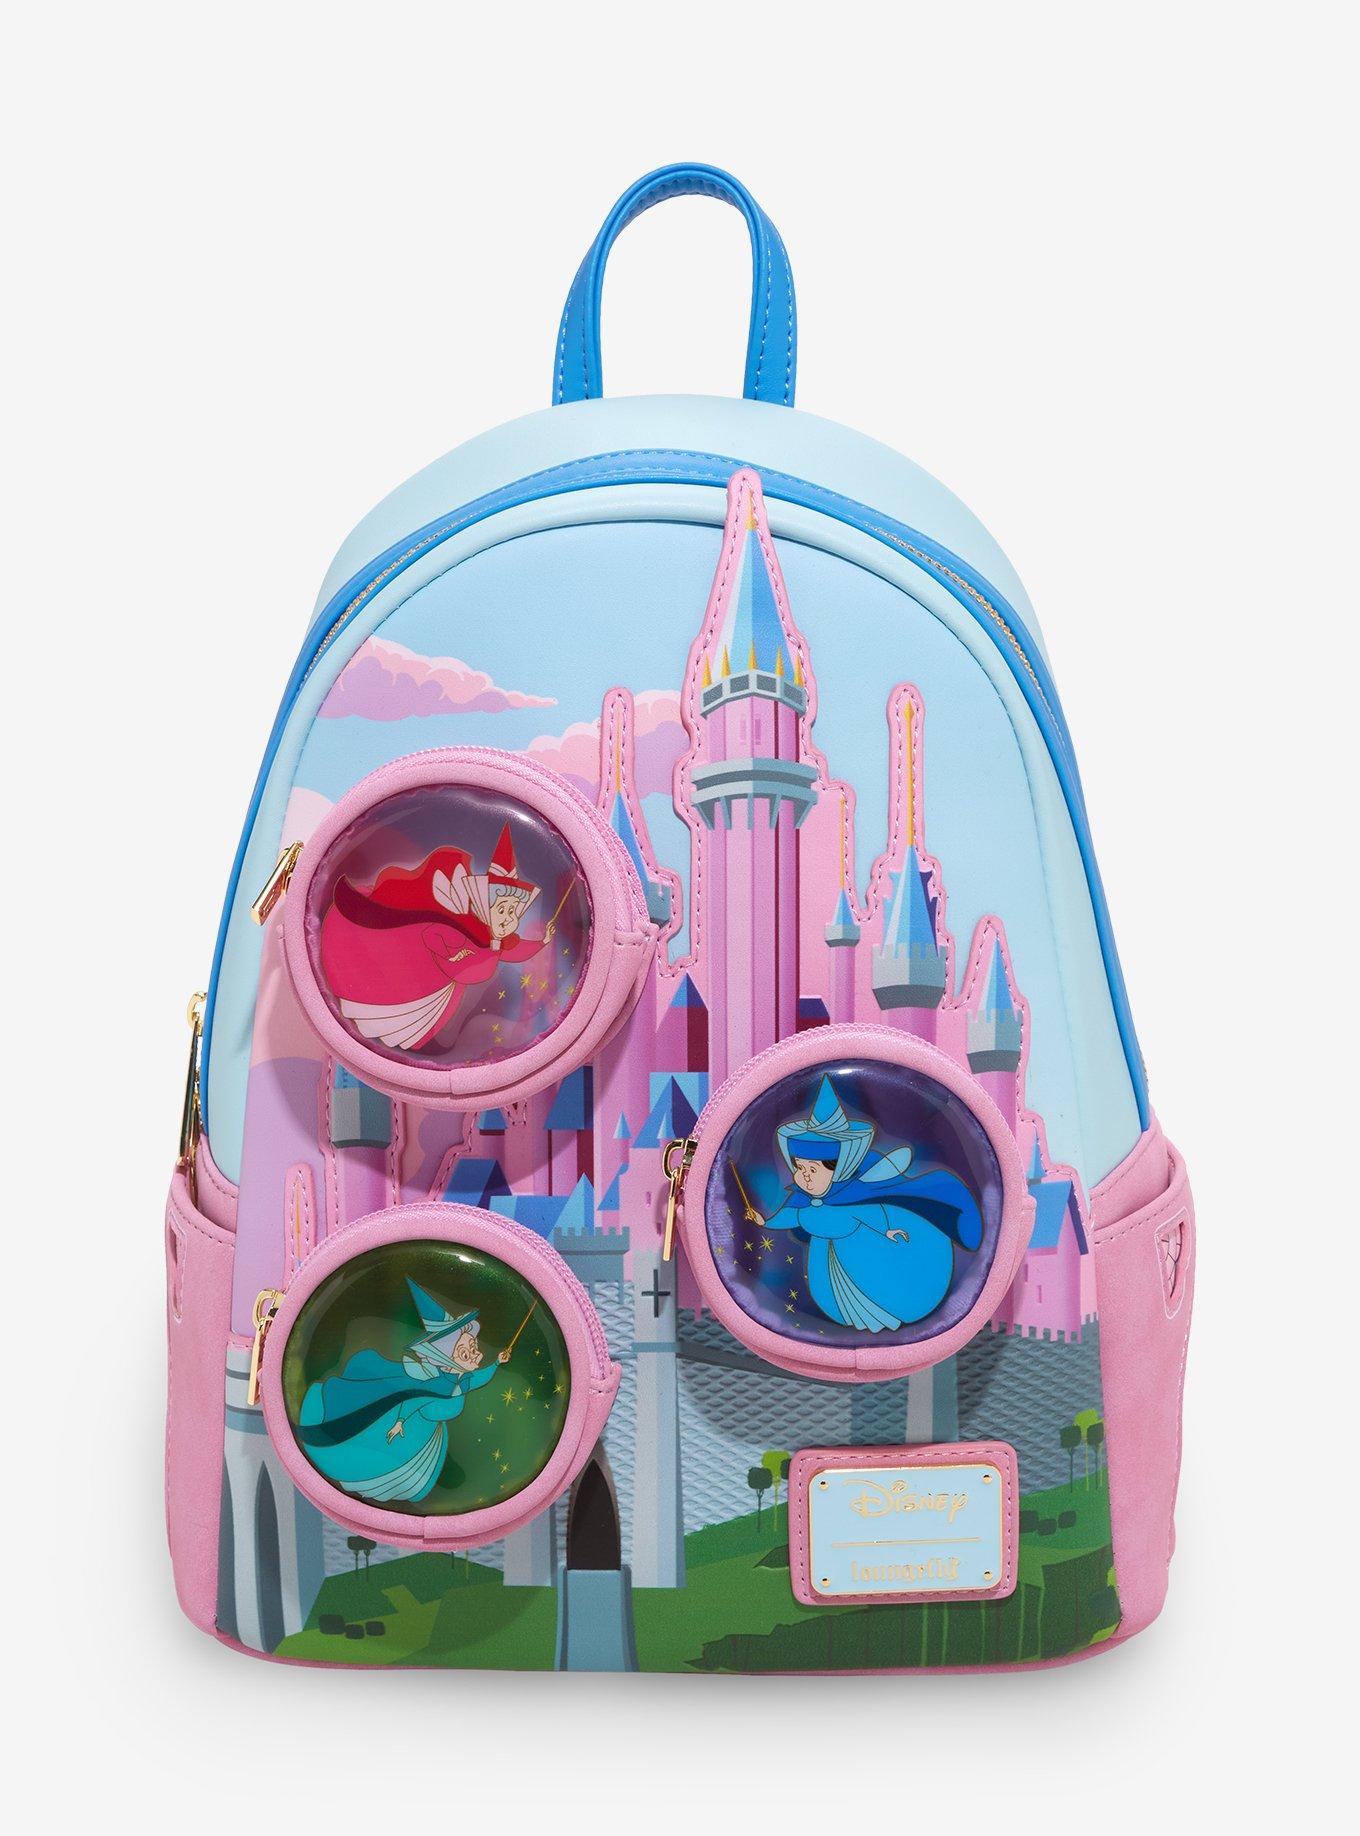 Disney Just Dropped a NEW Loungefly Bag and 3 More Souvenirs 